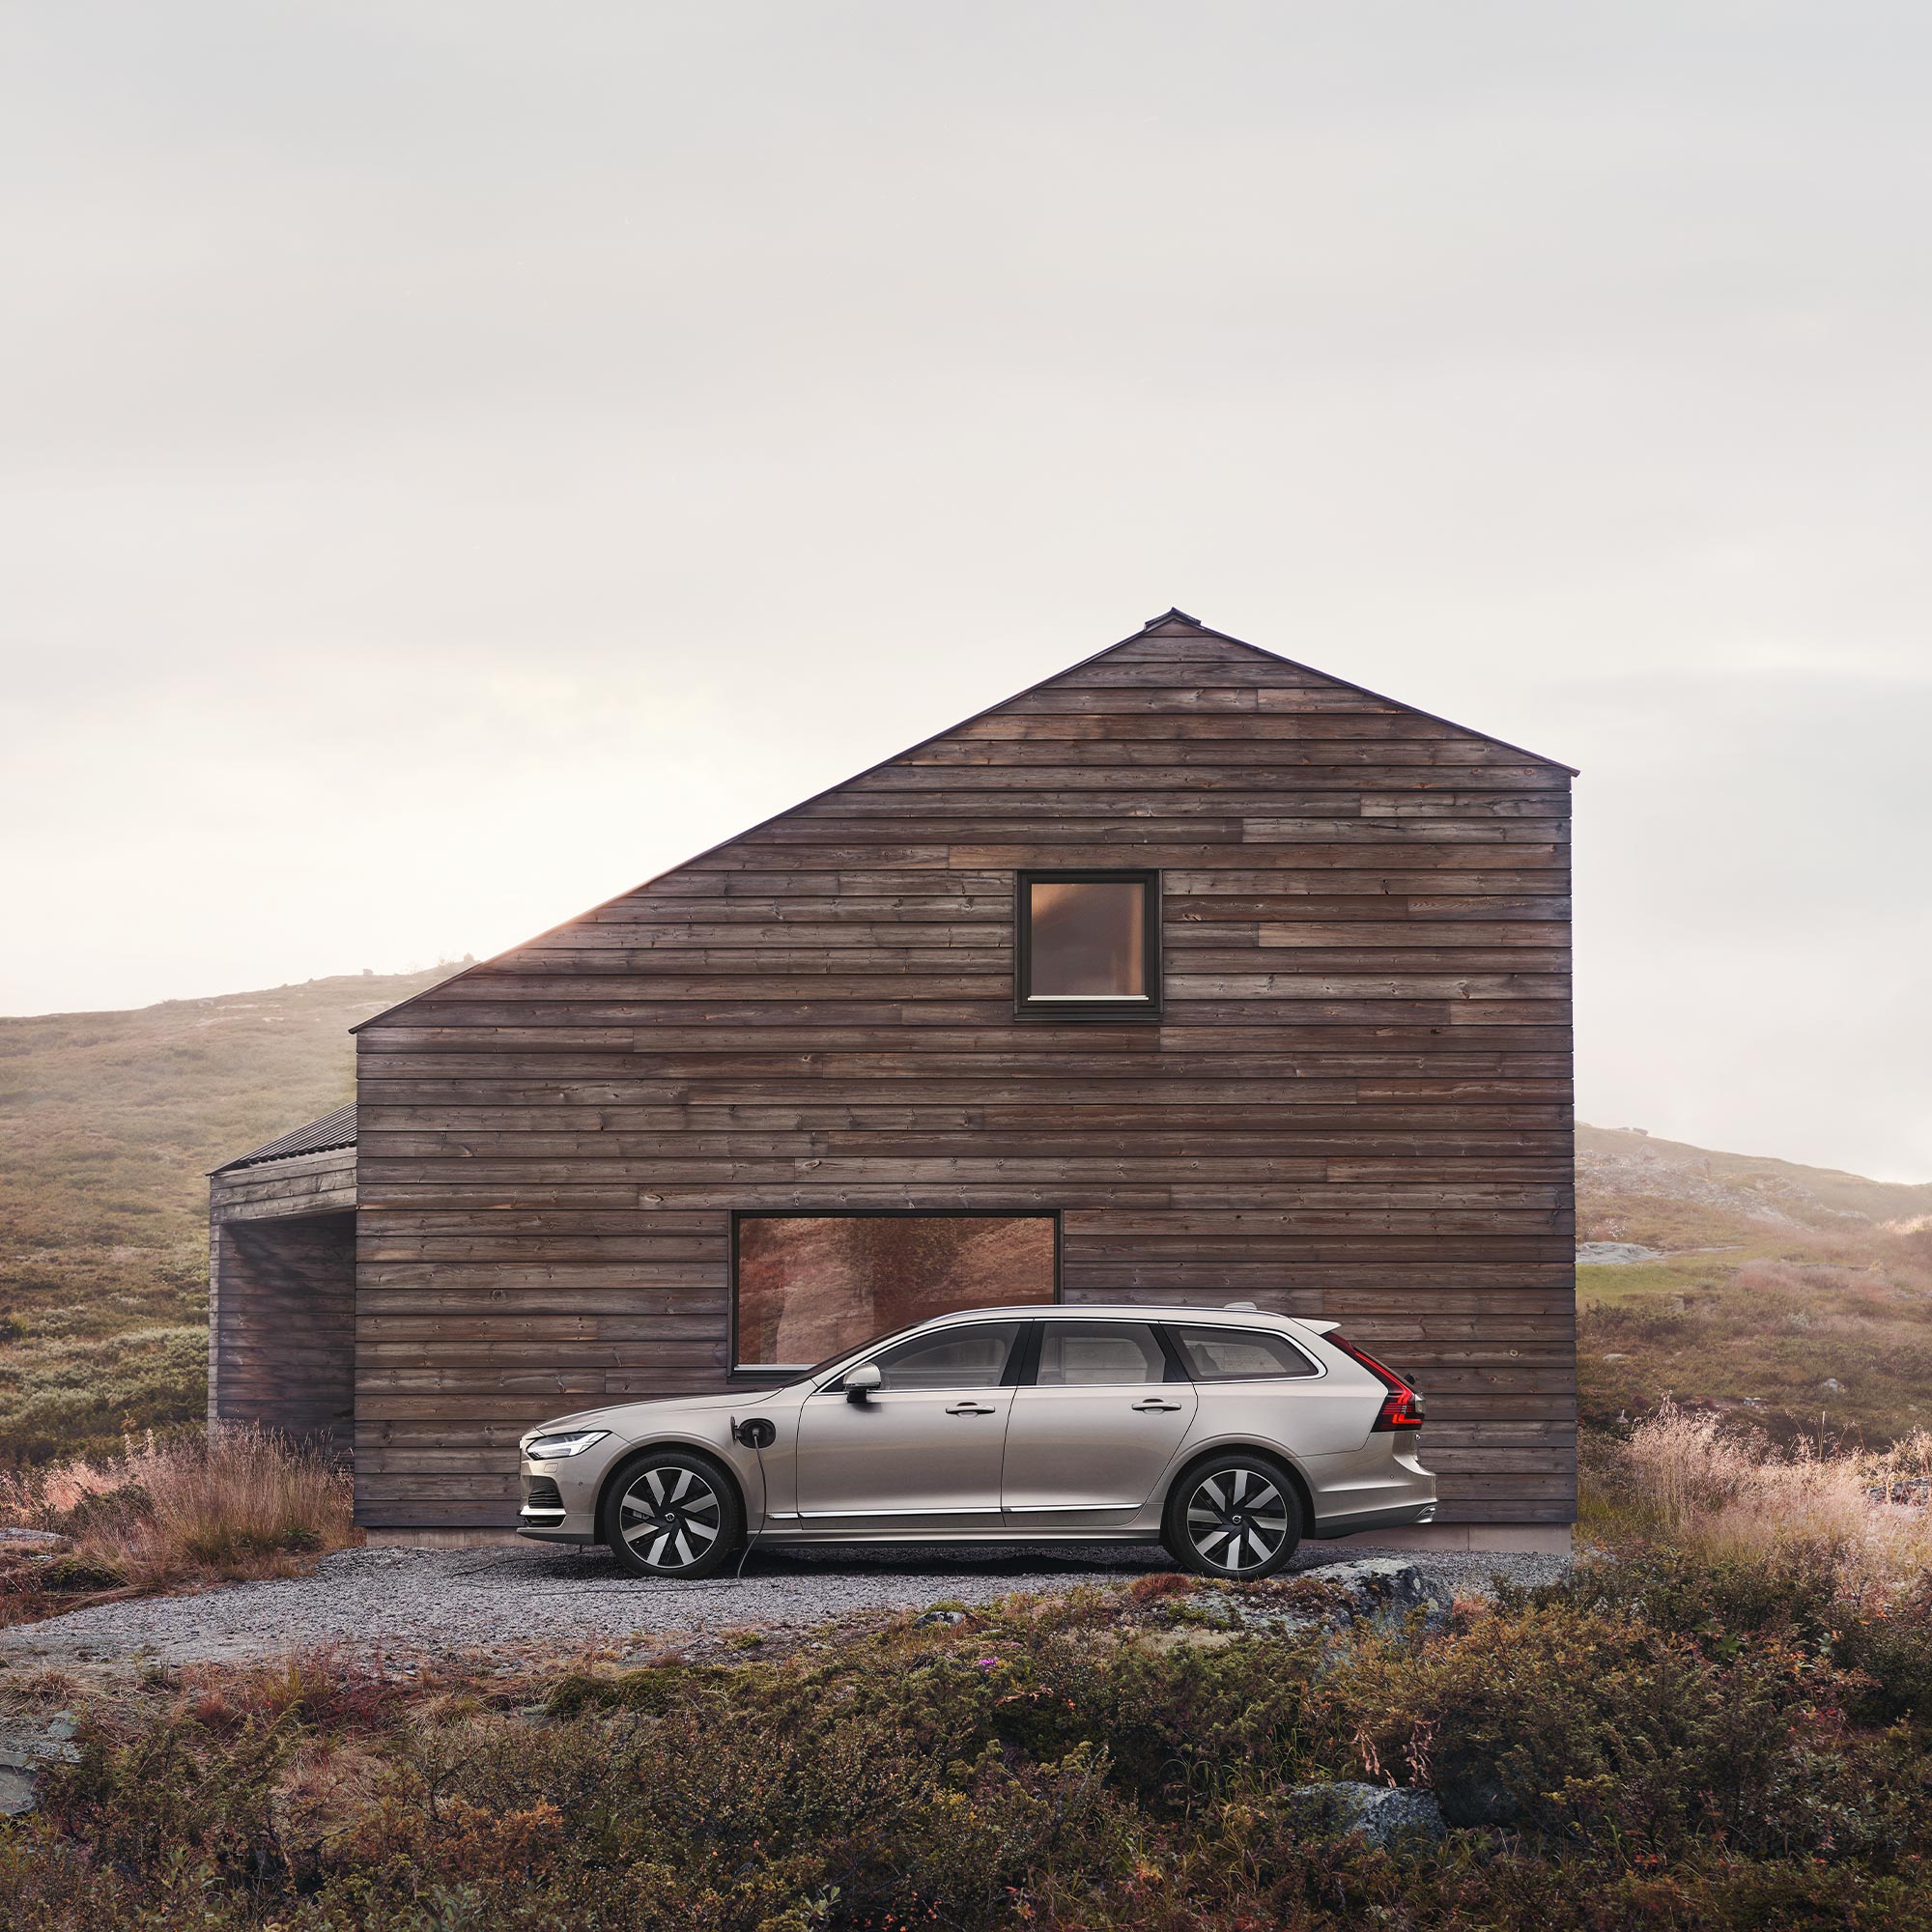 Volvo V90 recharge in front of a cabin in the mountains.